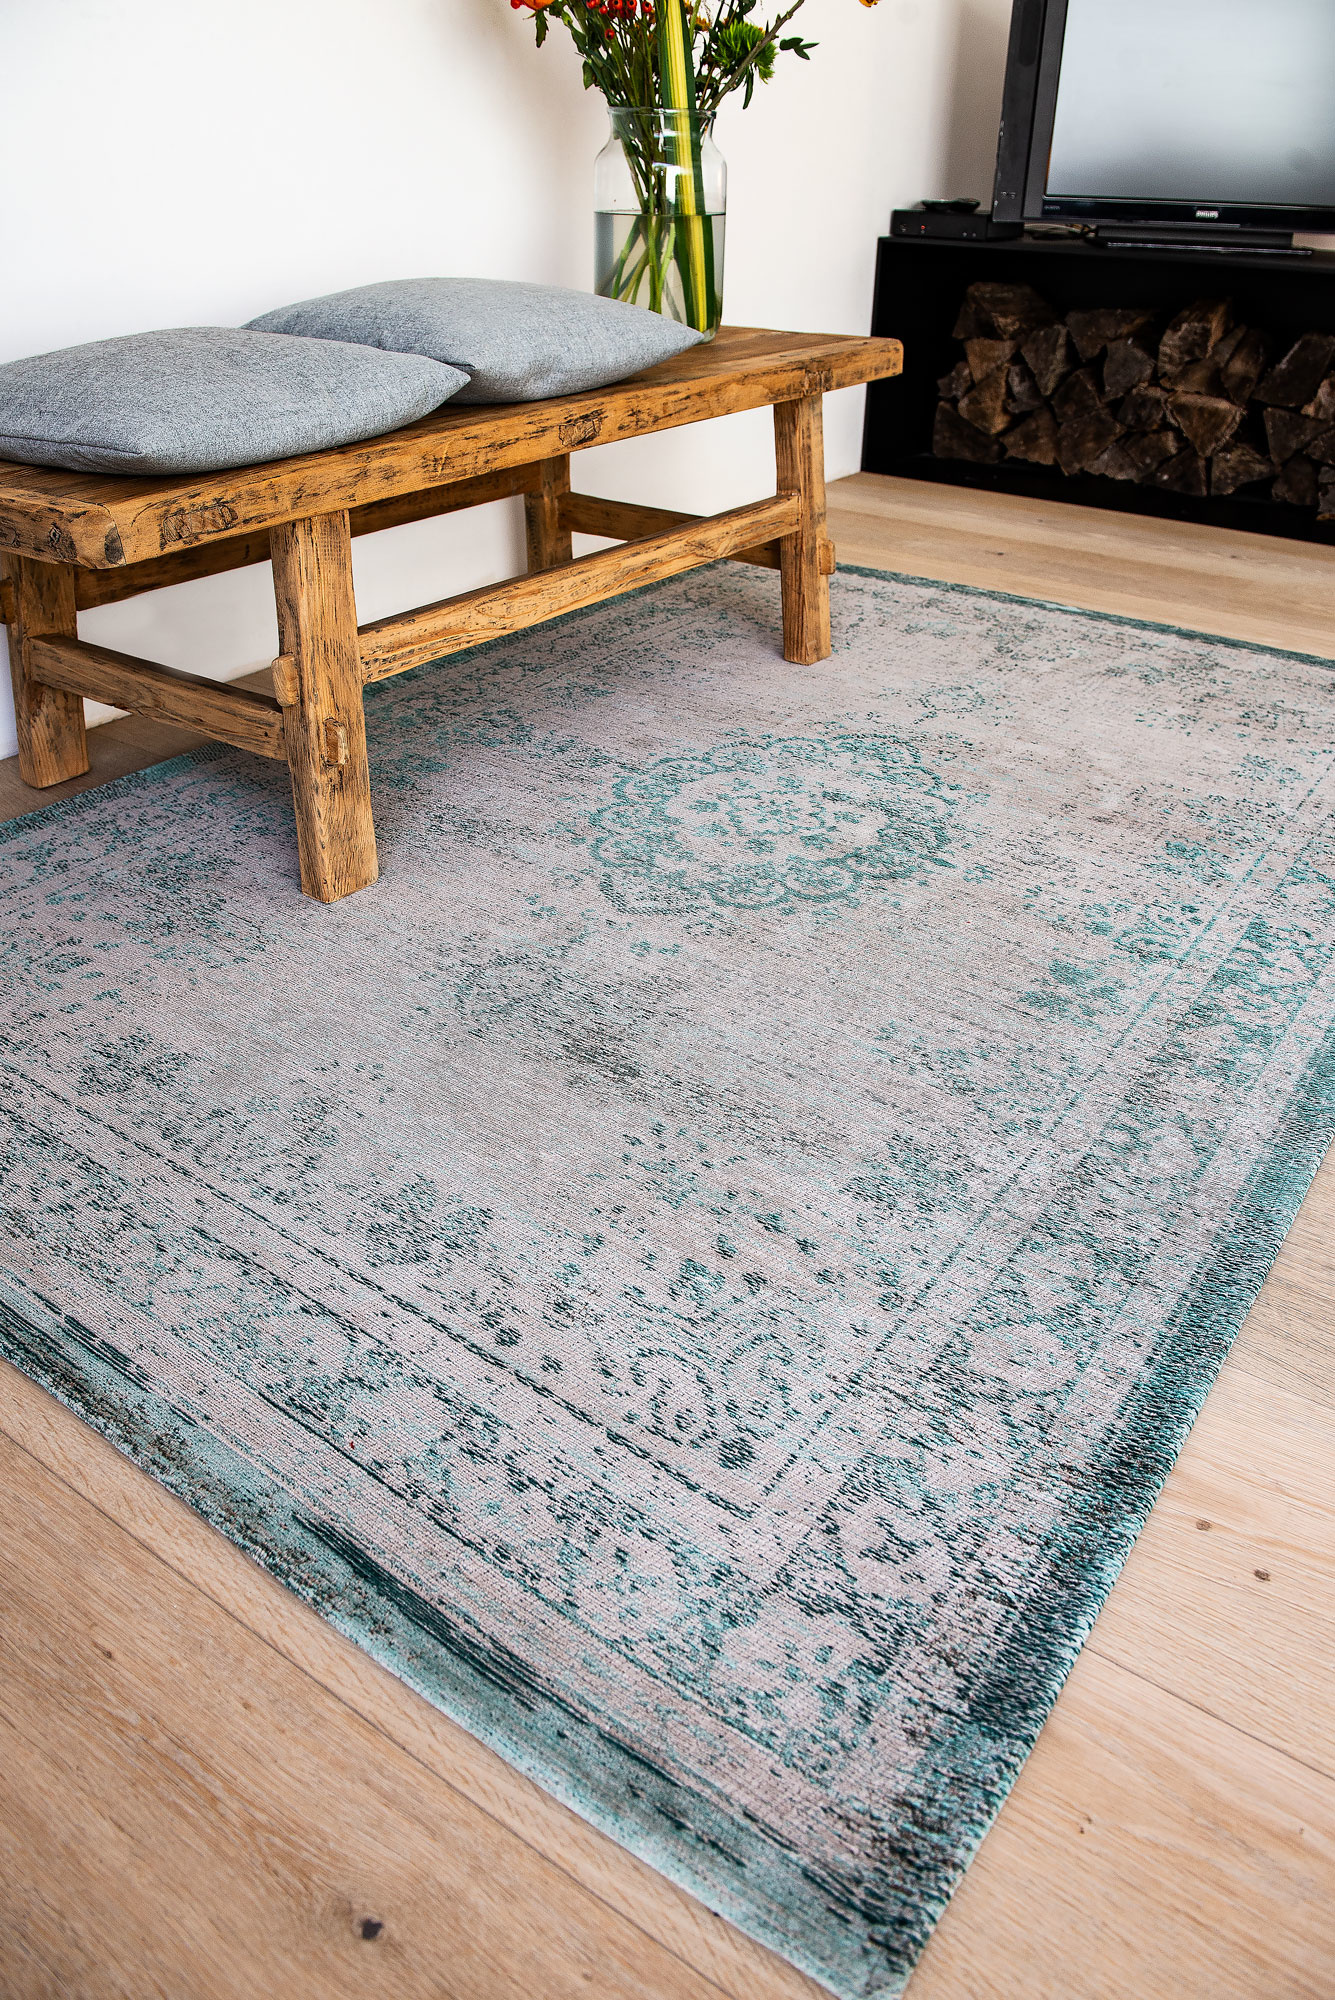 Medallion Turquoise Flatwoven Rug ☞ Size: 2' 7" x 5' (80 x 150 cm)